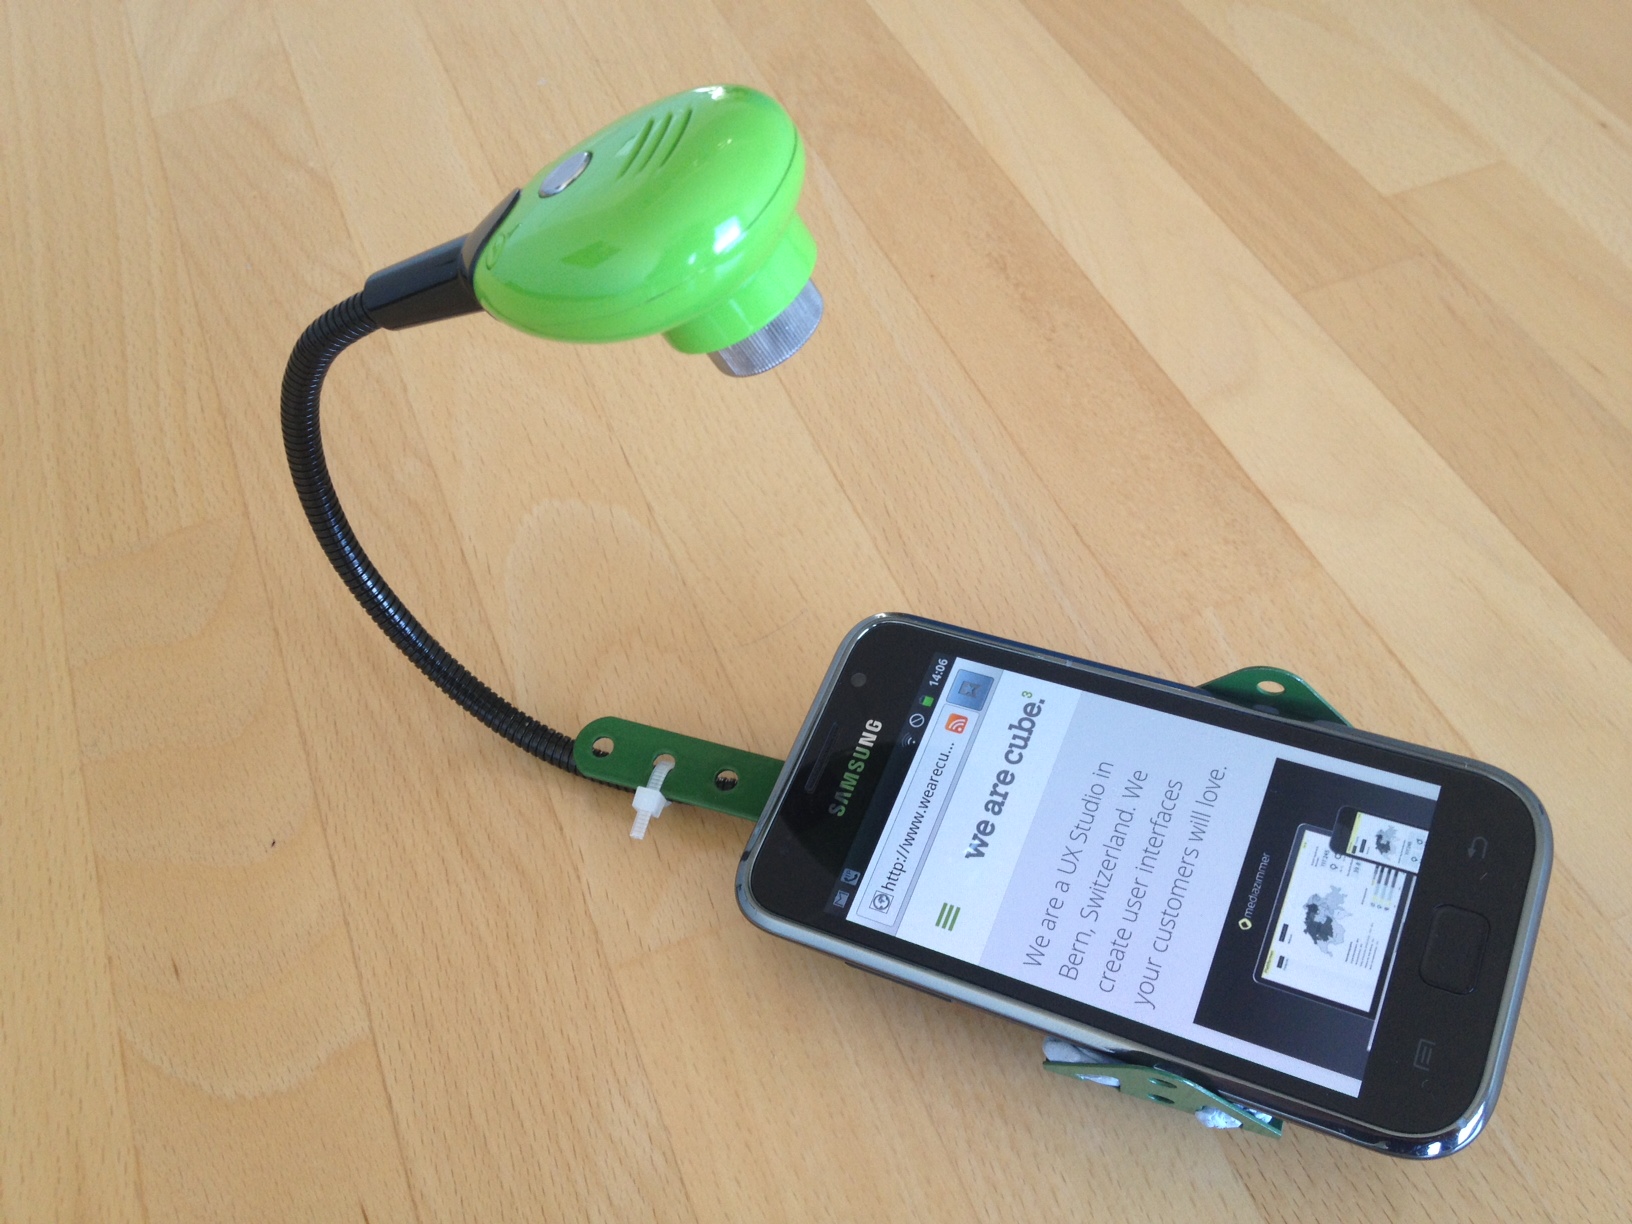 Mobile Usability Testing Gear - Do it yourself